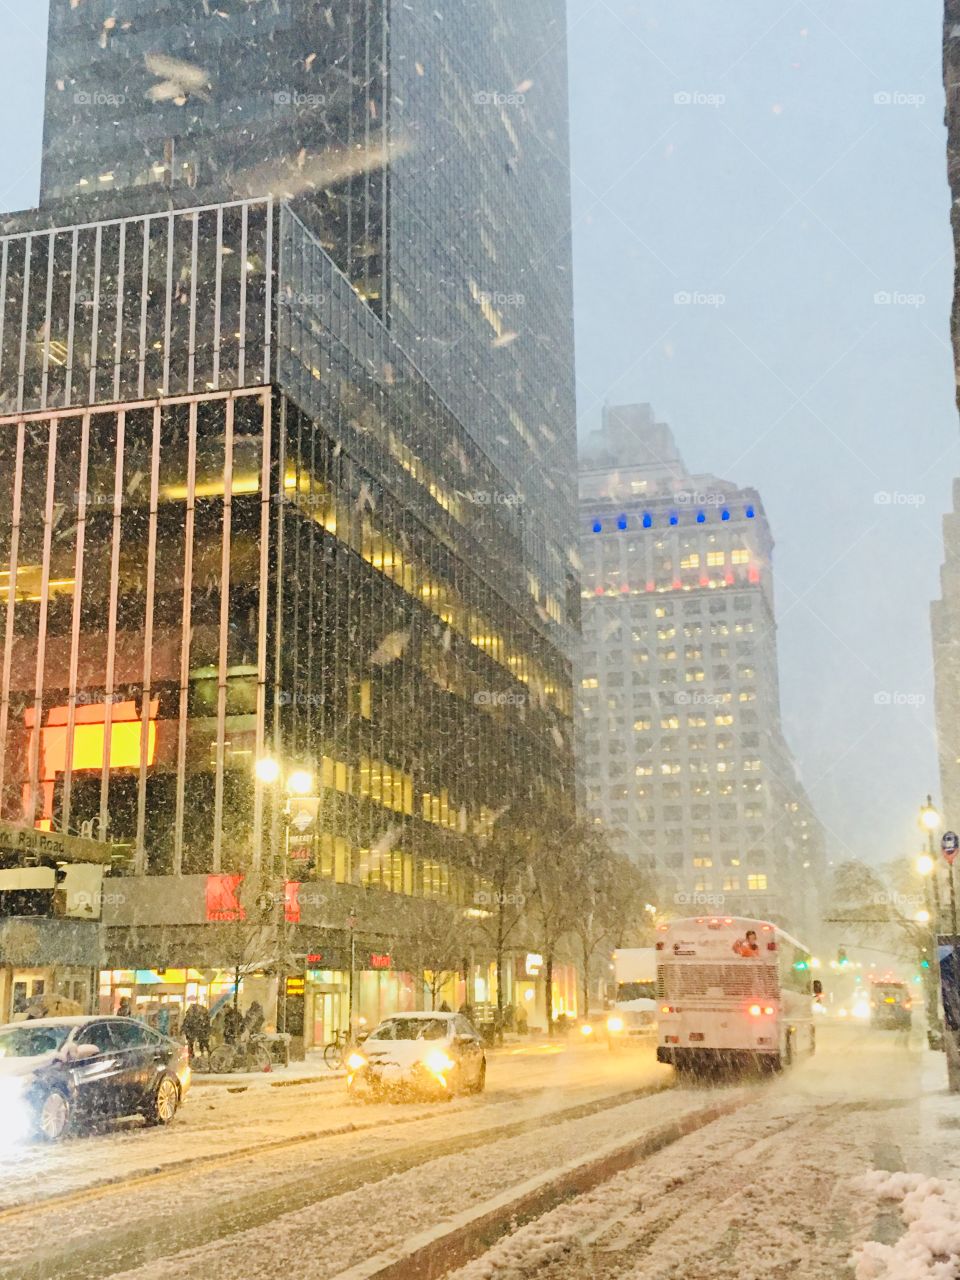 Looking down a New York City street in the middle of a bad snowstorm 